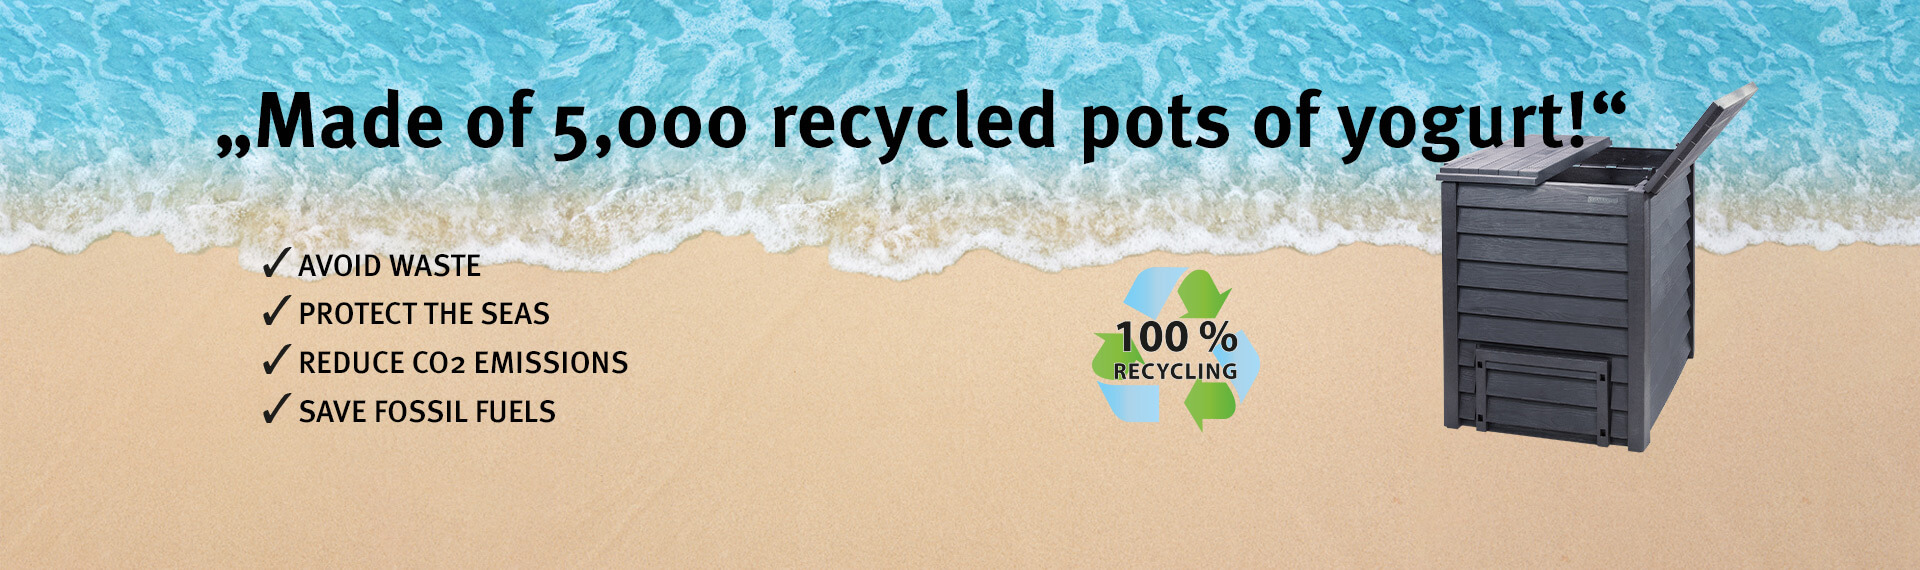 Up to 100 % recycling